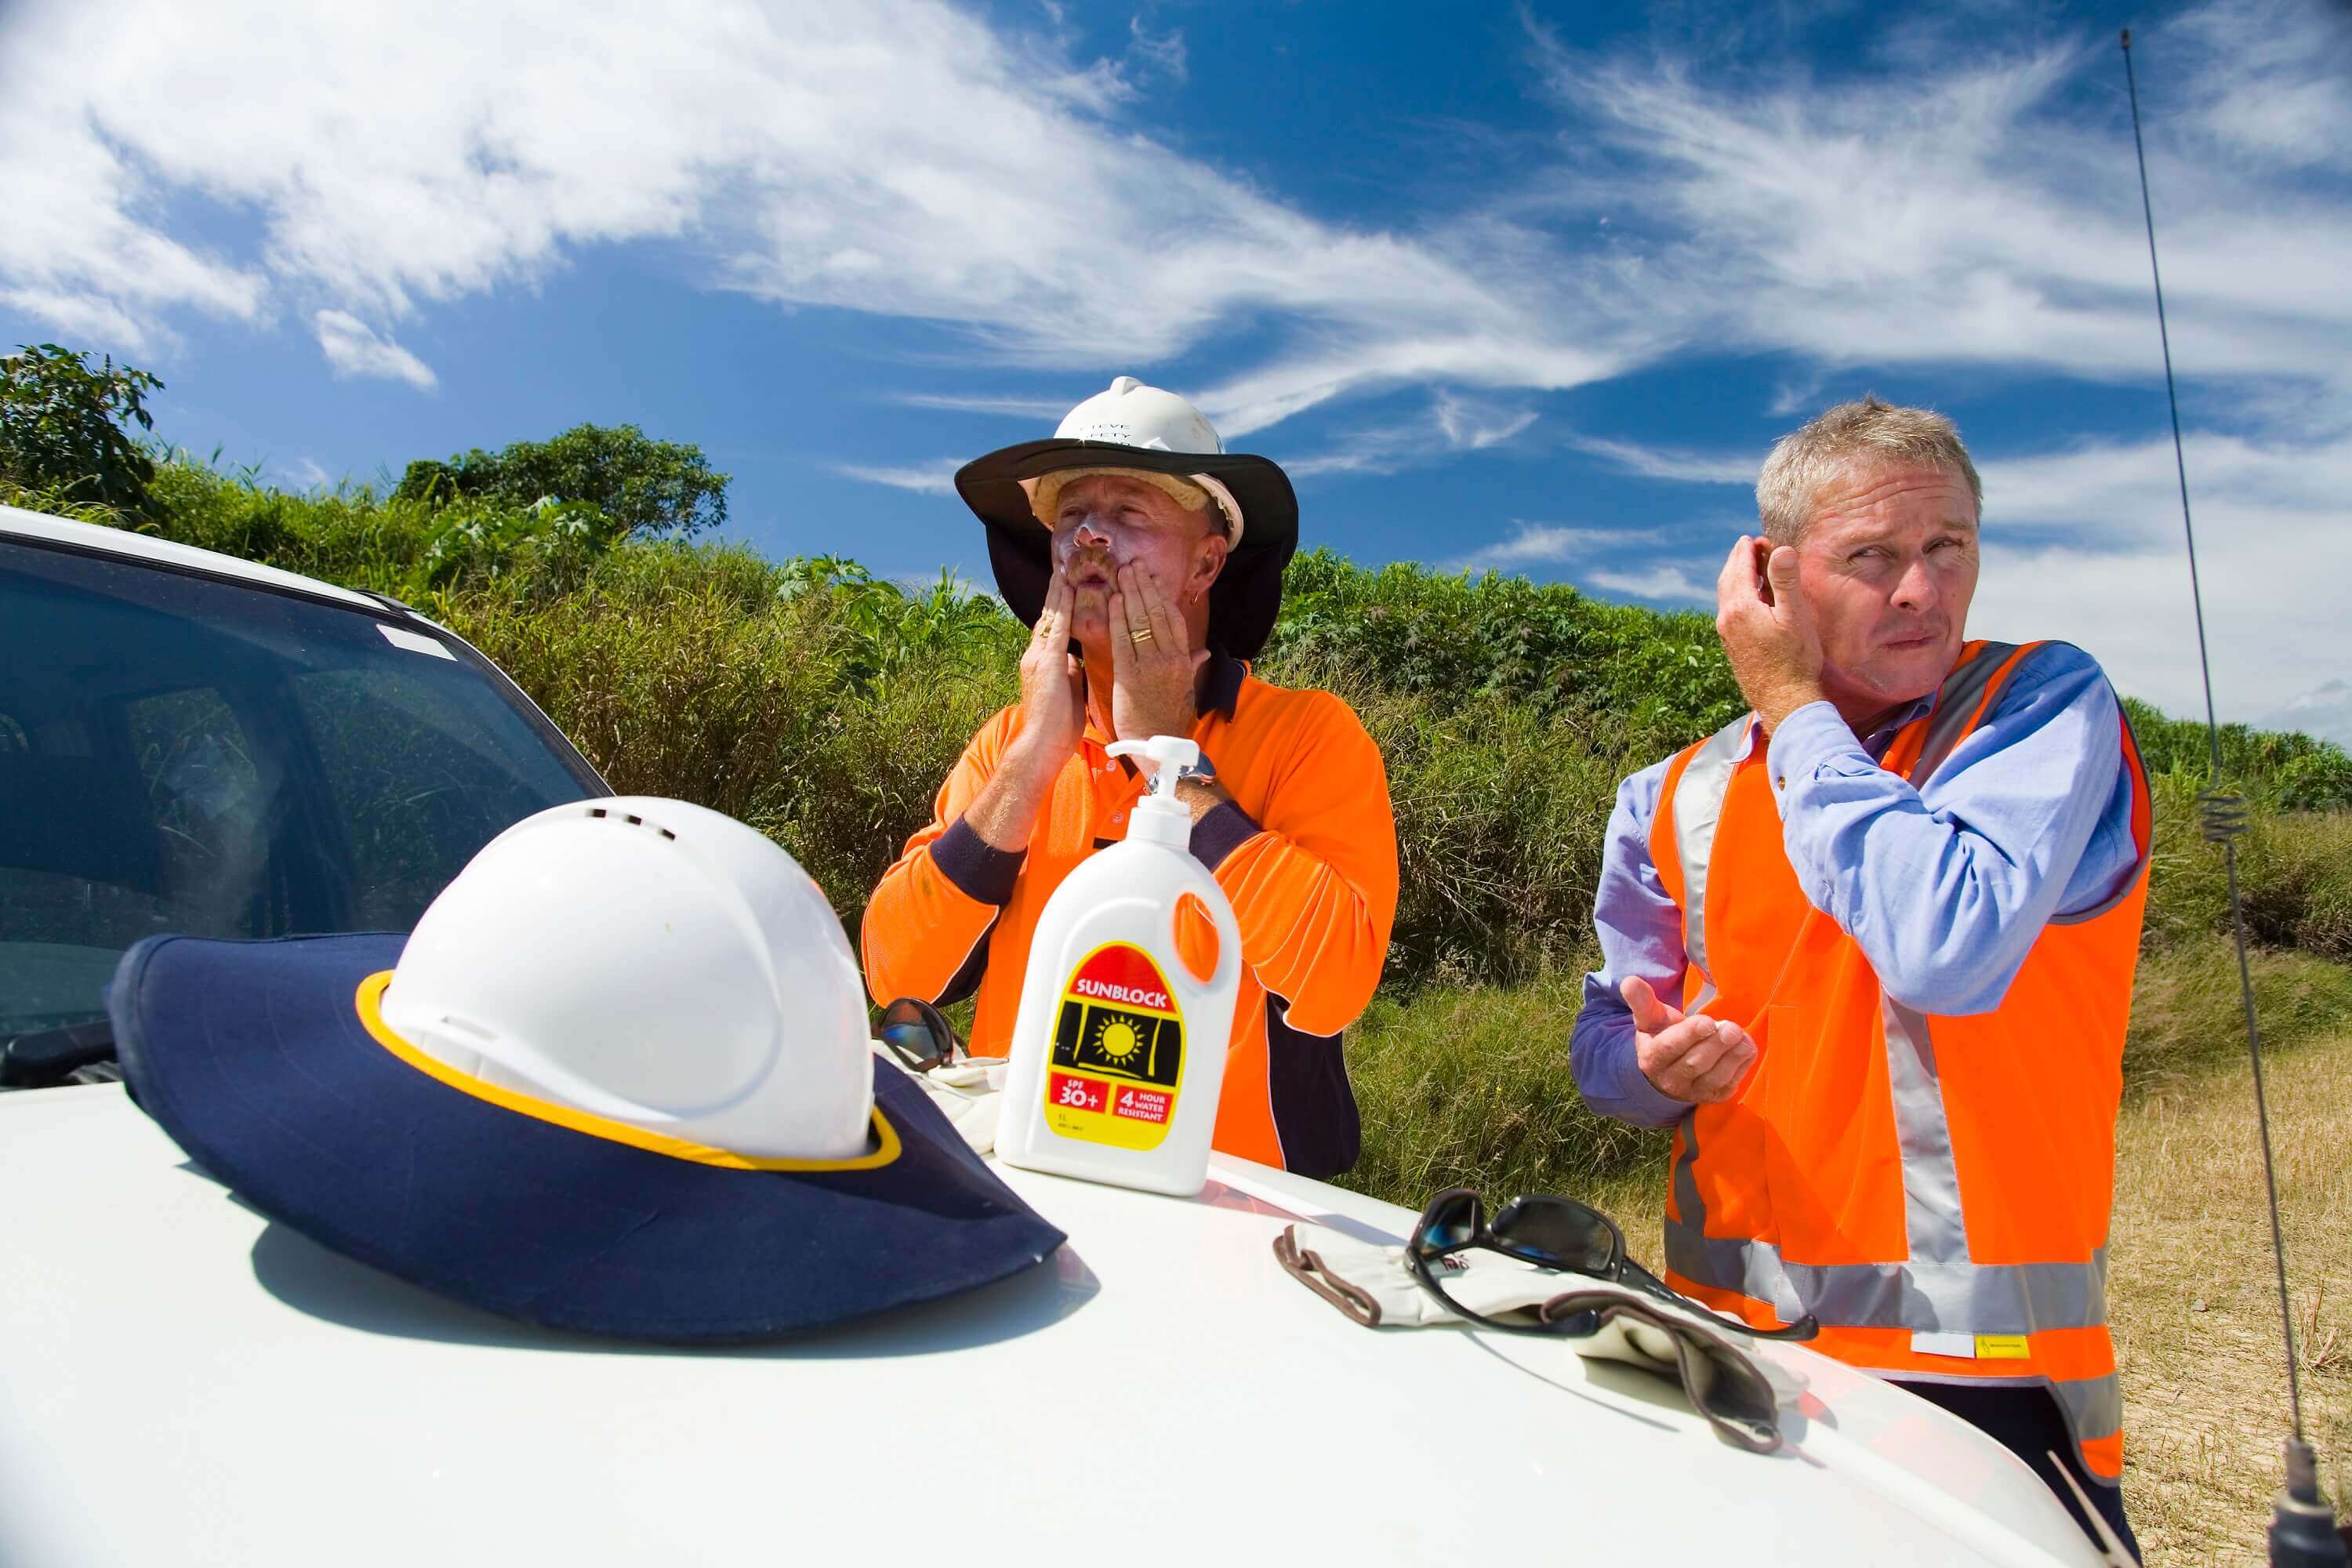 Wear all the PPE required to stay safe in Australian summer